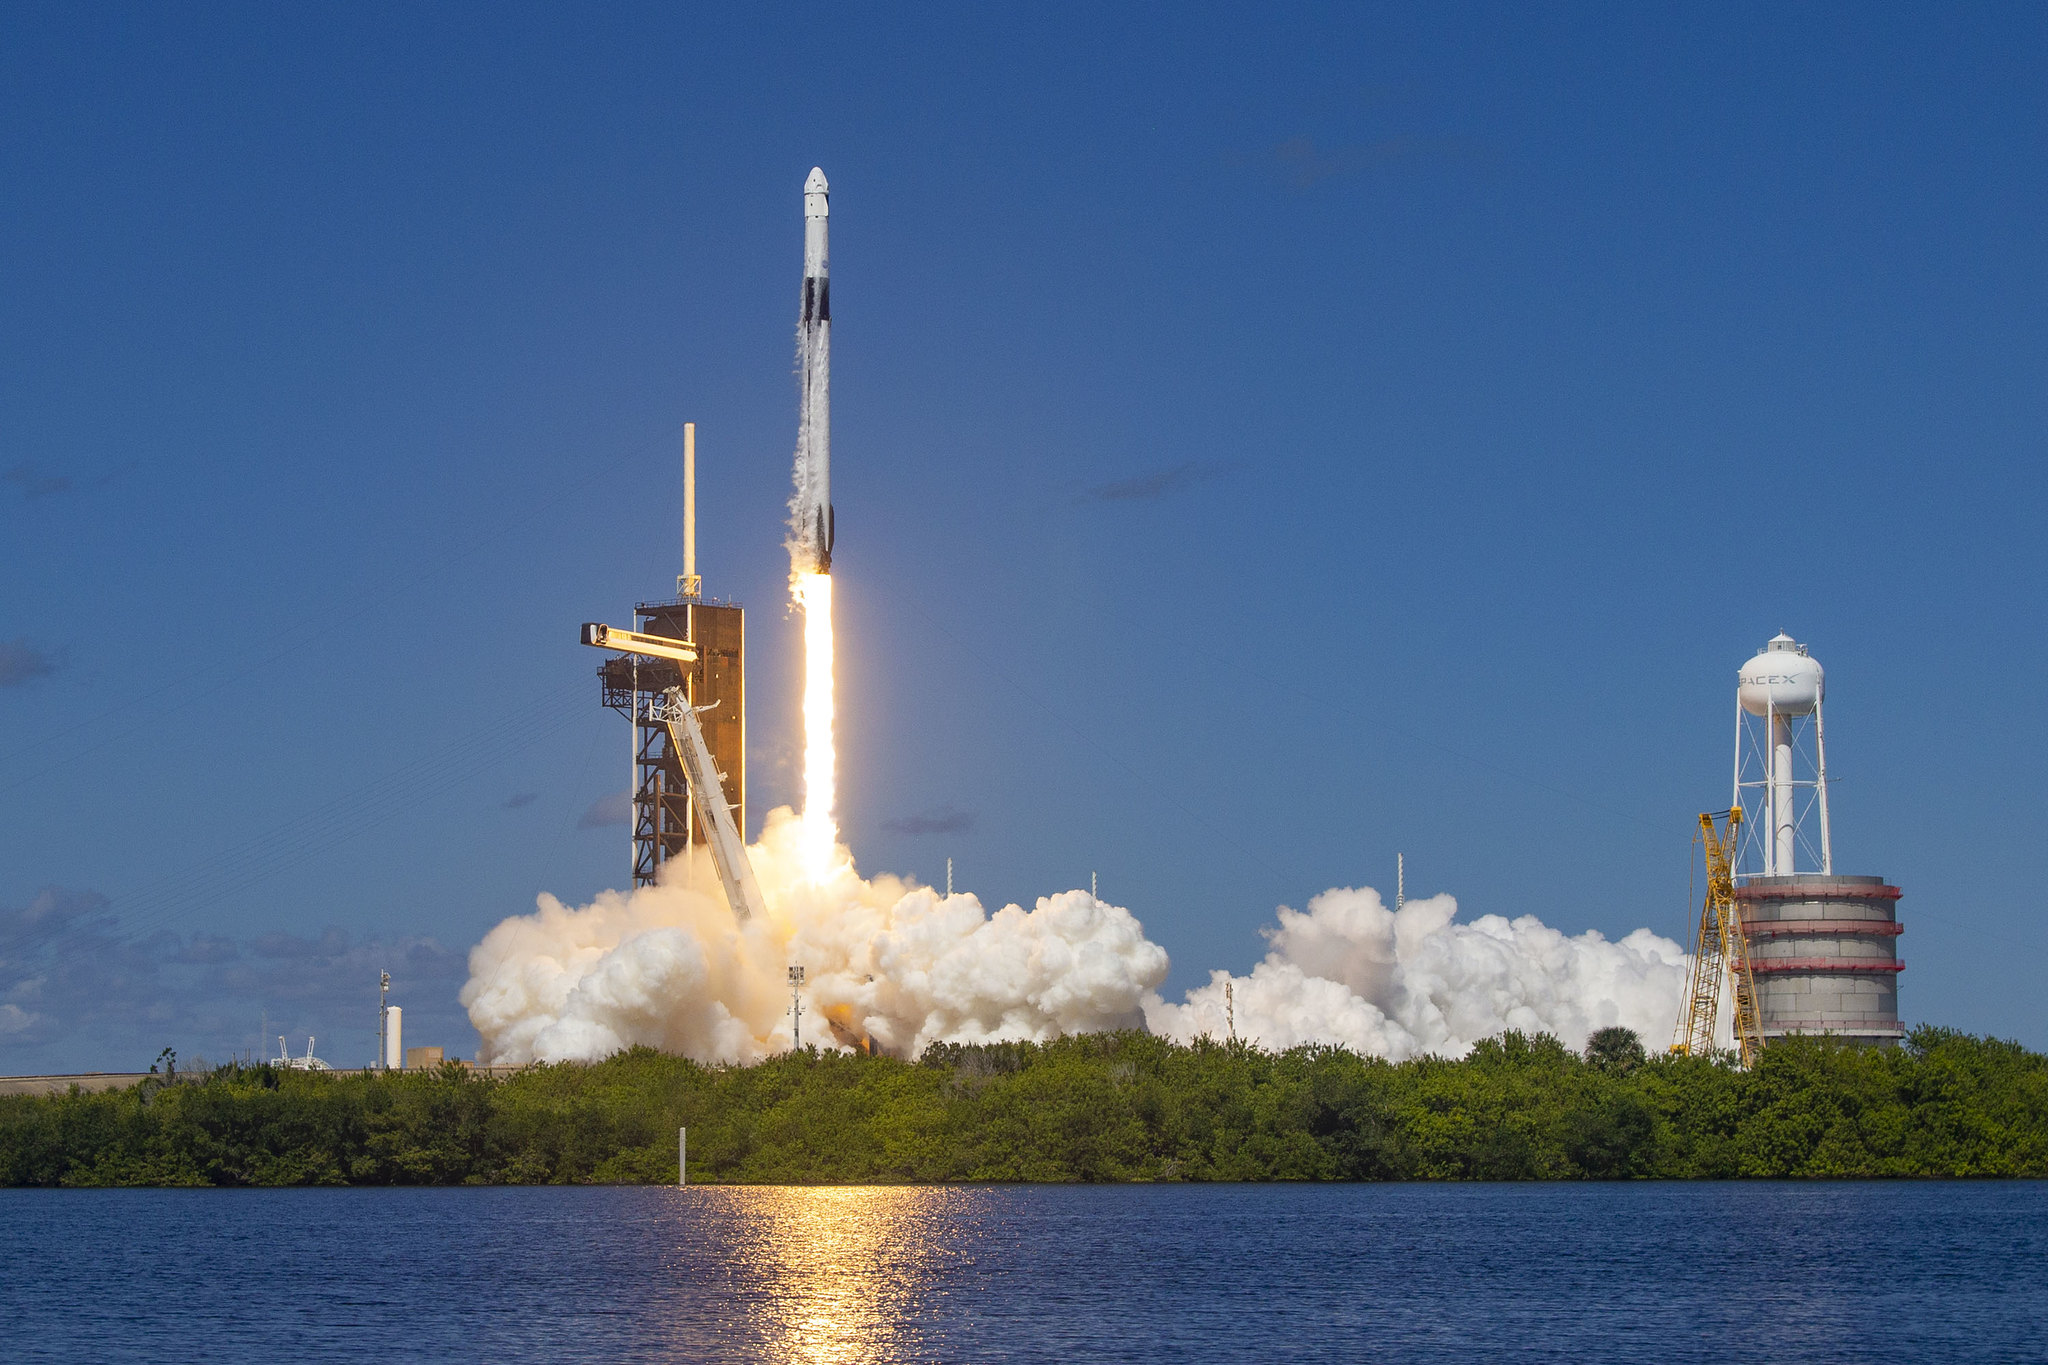 NASA's SpaceX Crew-5 mission launch from Kennedy Space Center in Florida